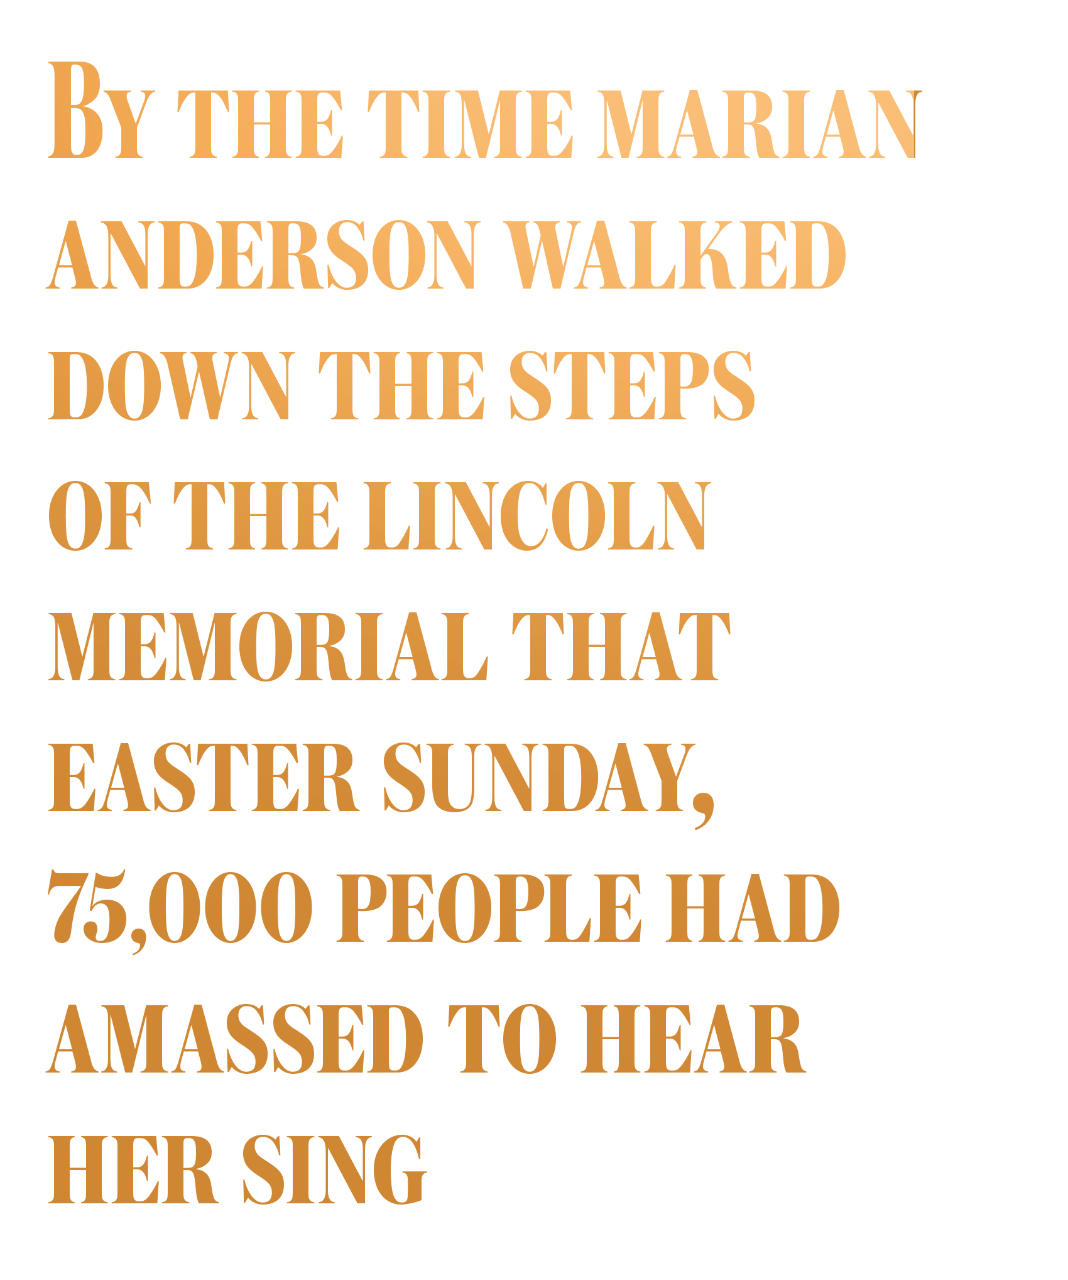 By the time Marian Anderson walked down the steps of the Lincoln Memorial that Easter Sunday, 75,000 people had amassed to hear her sing.